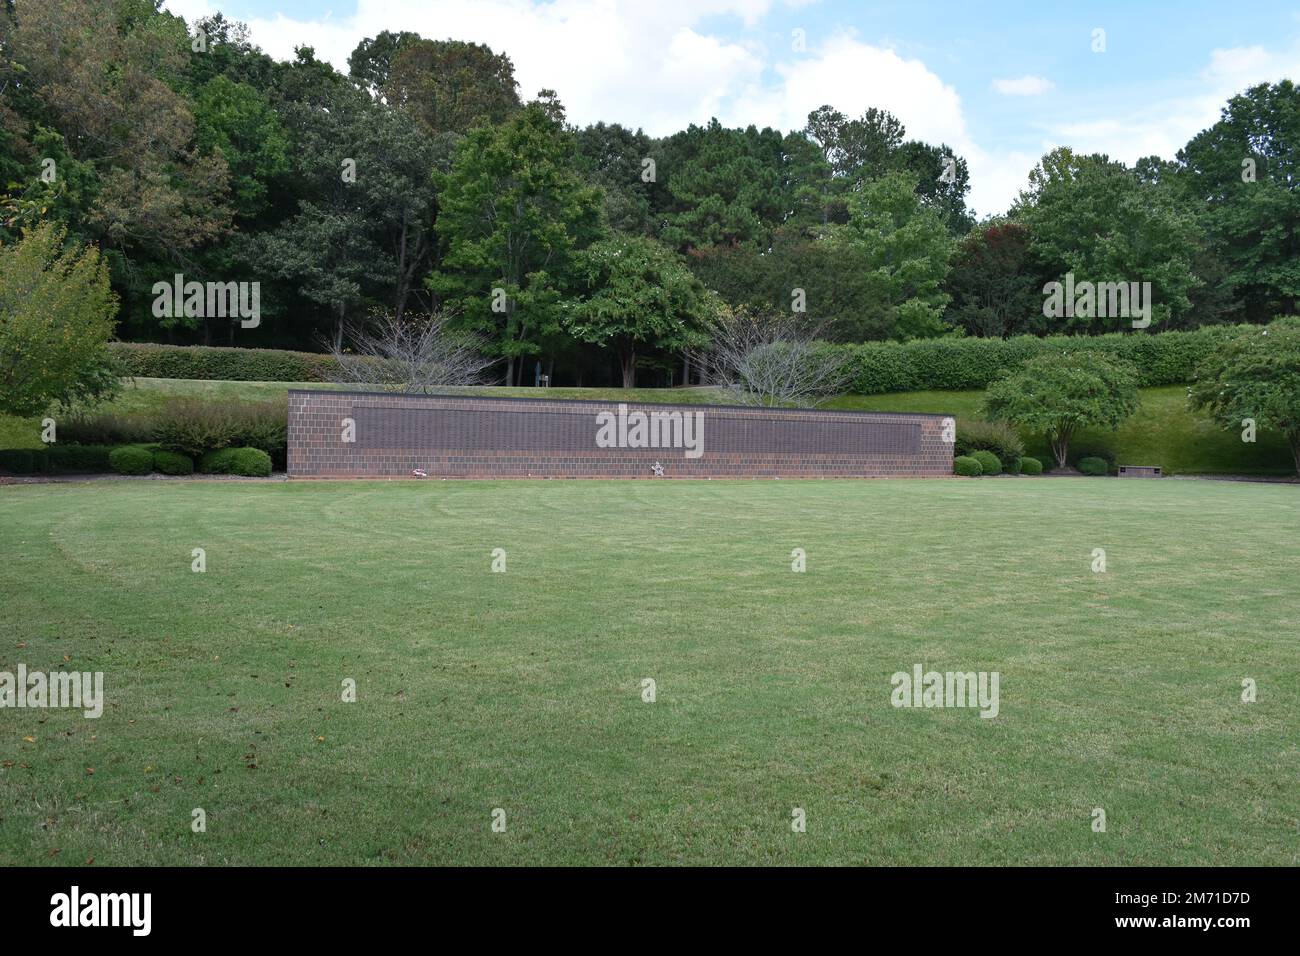 The North Carolina Vietnam War Memorial with names of Soldiers from North Carolina lost. Stock Photo